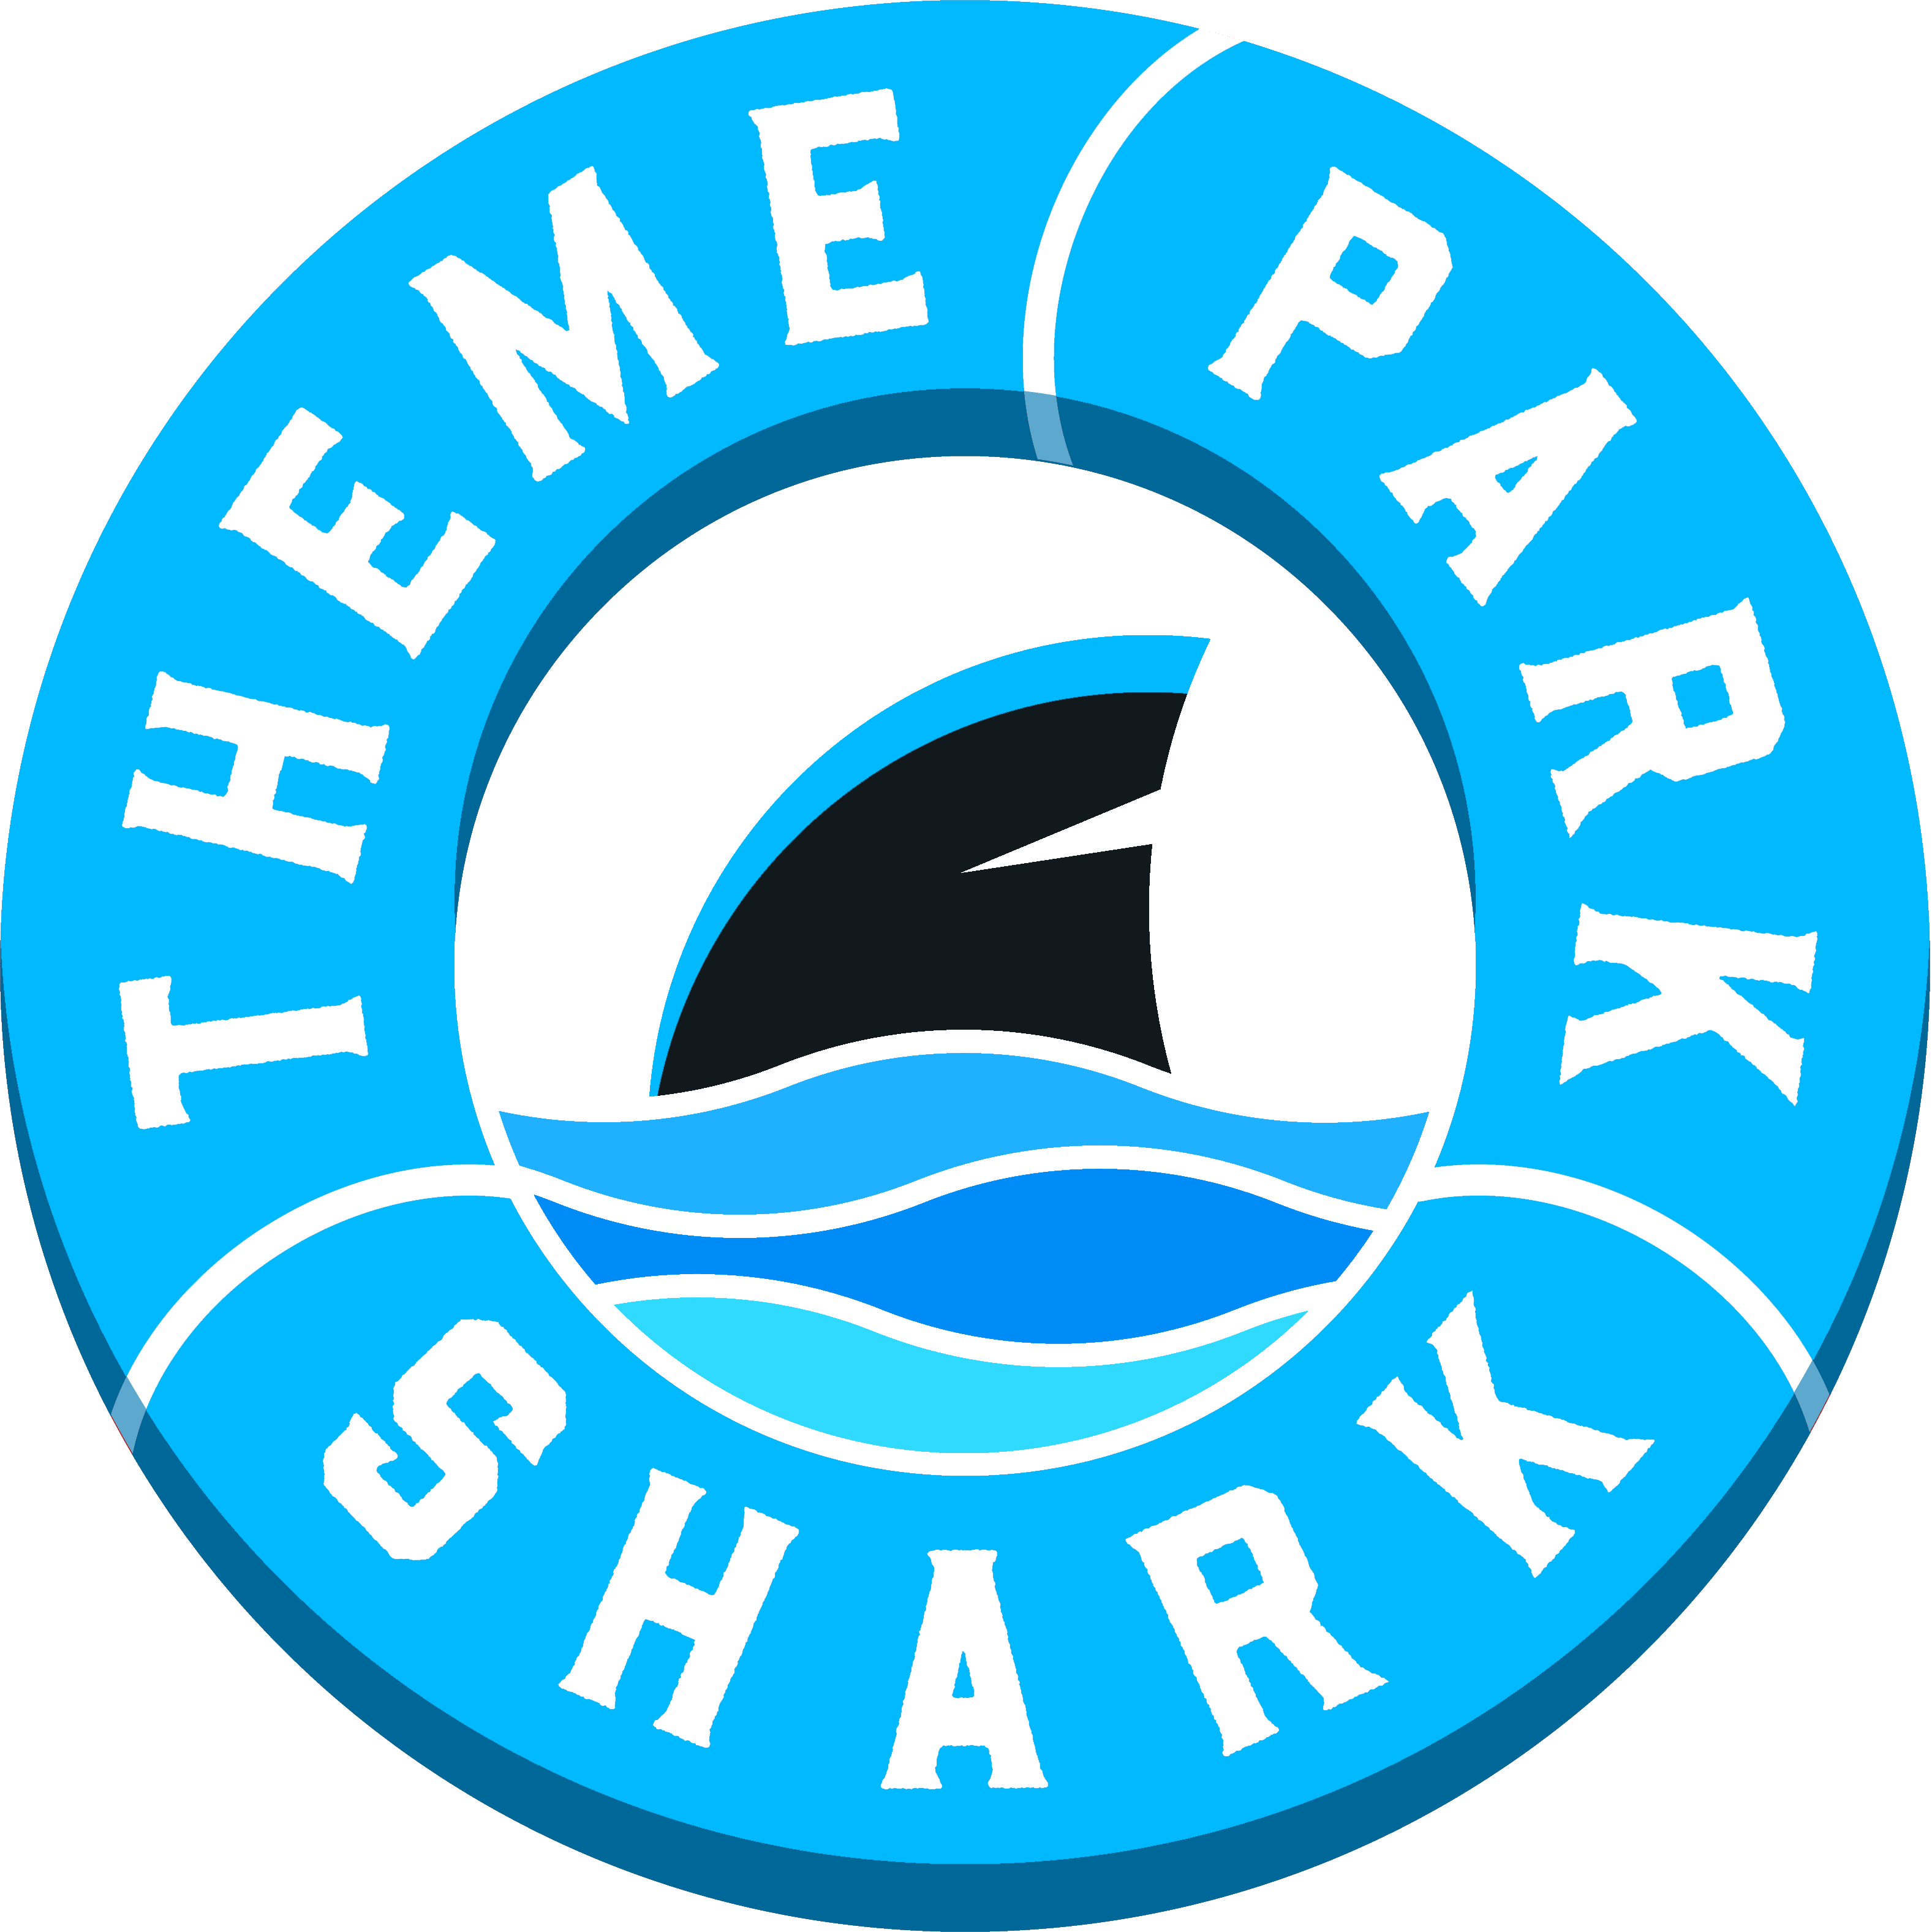 Theme Park Shark | Your Place for News, Videos and More on Your Favorite Theme Parks